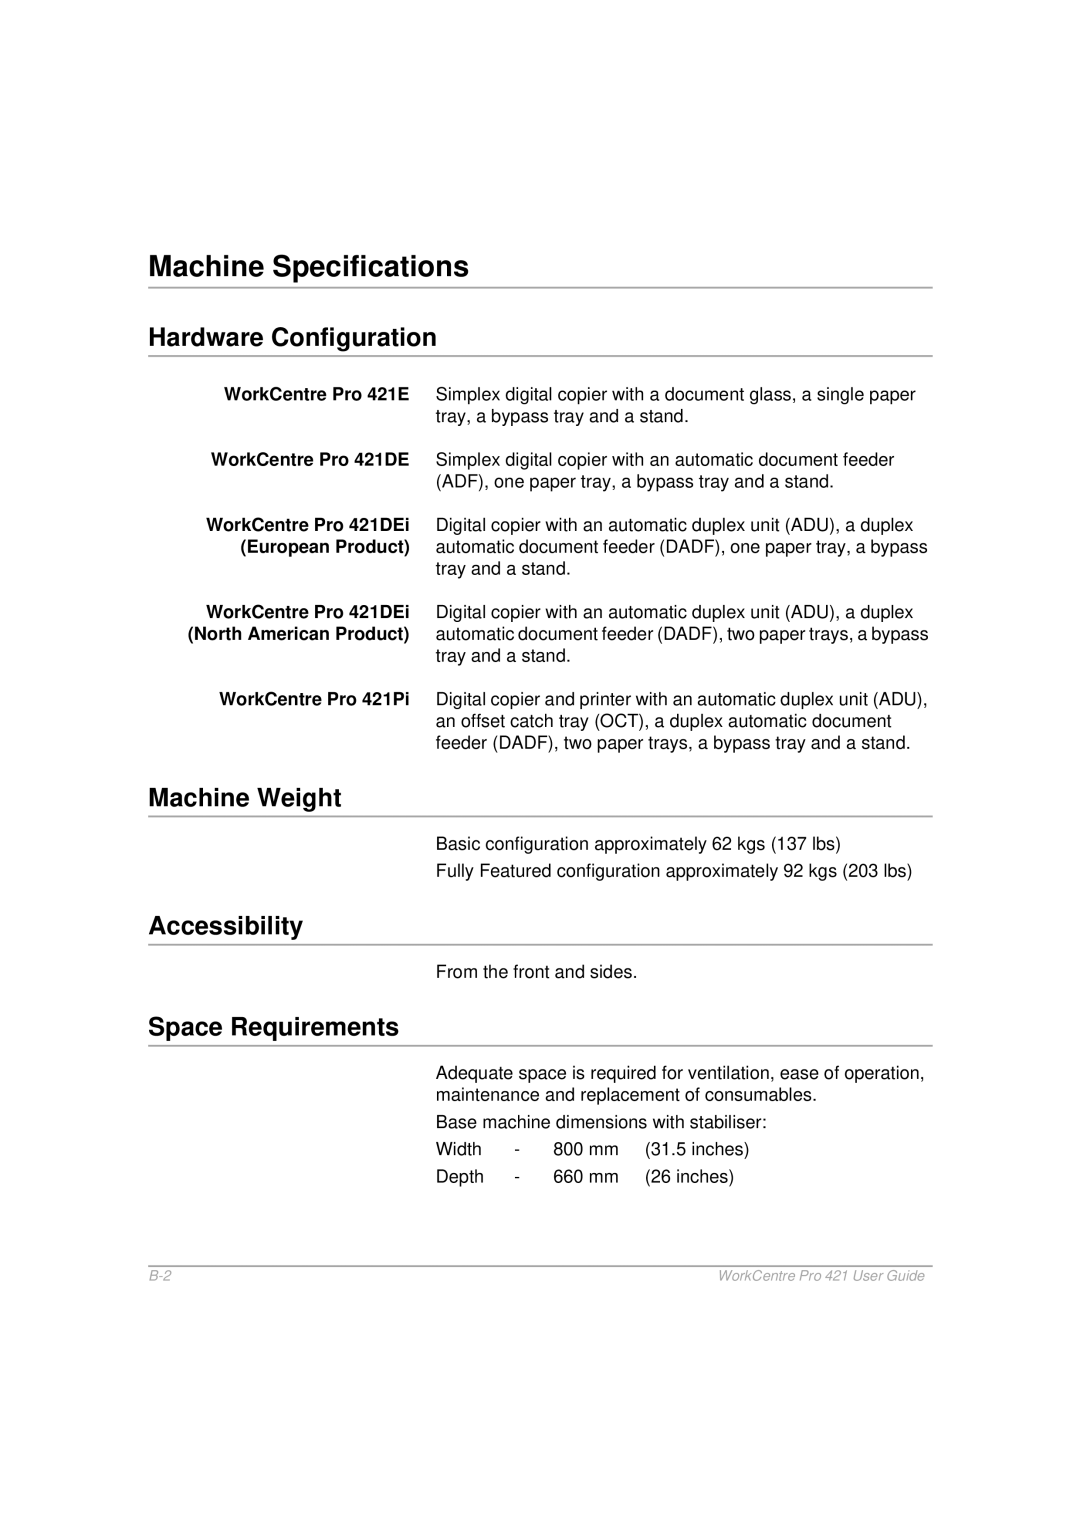 Xerox 421 manual Machine Specifications, Hardware Configuration, Machine Weight, Accessibility, Space Requirements 